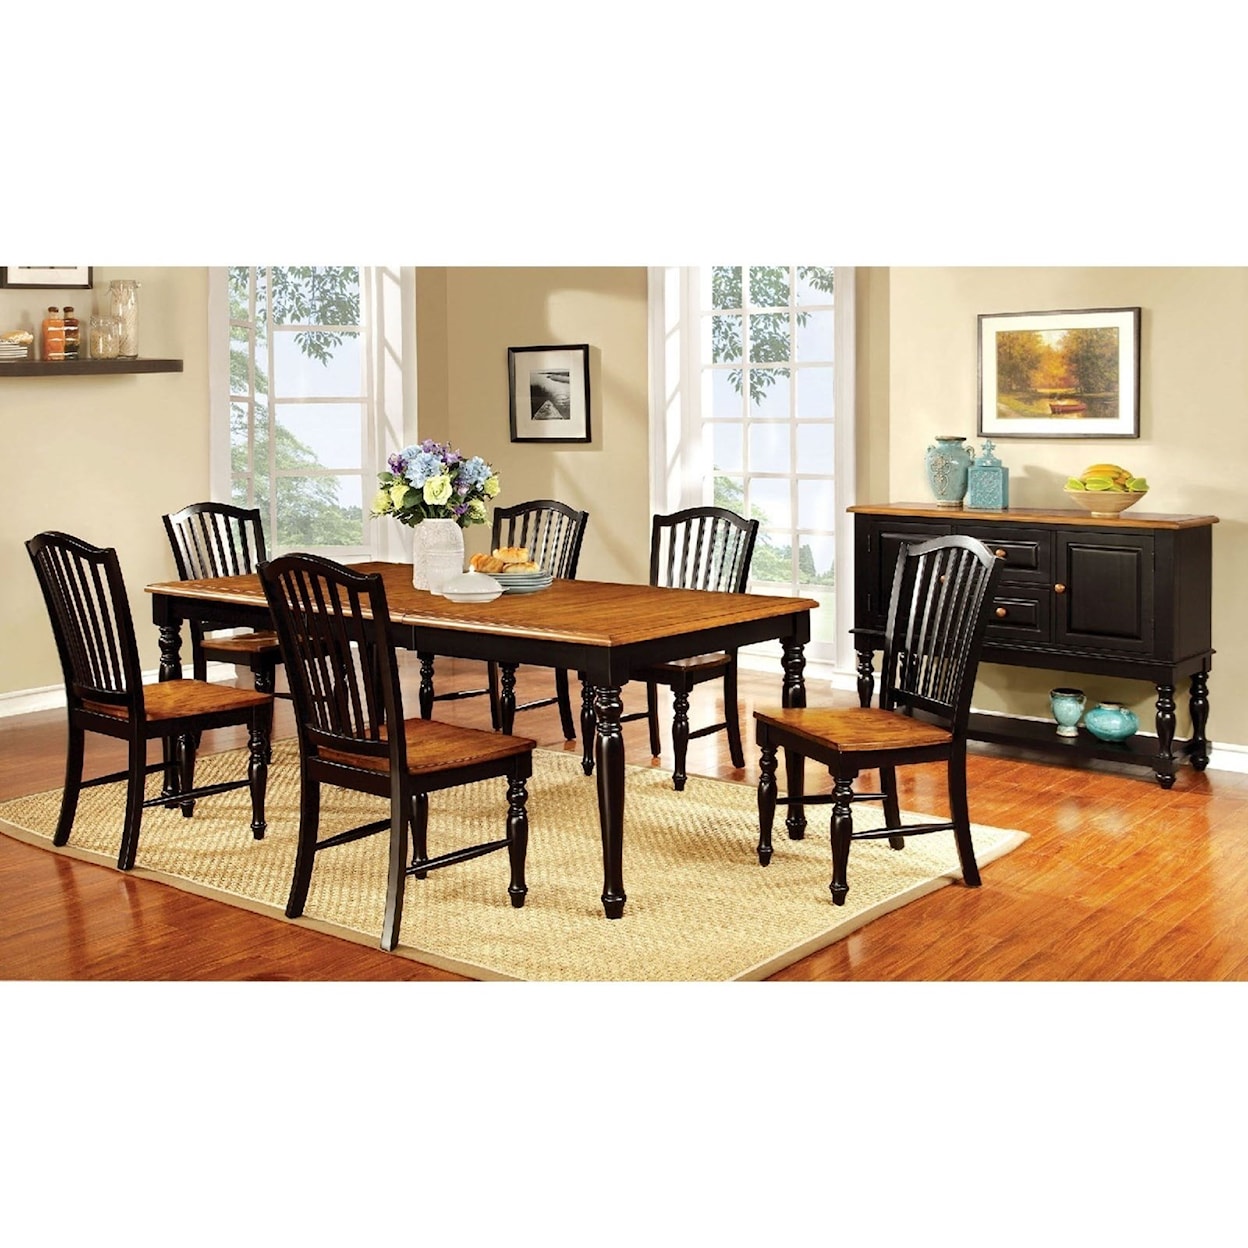 Furniture of America Mayville Table and 6 Chairs